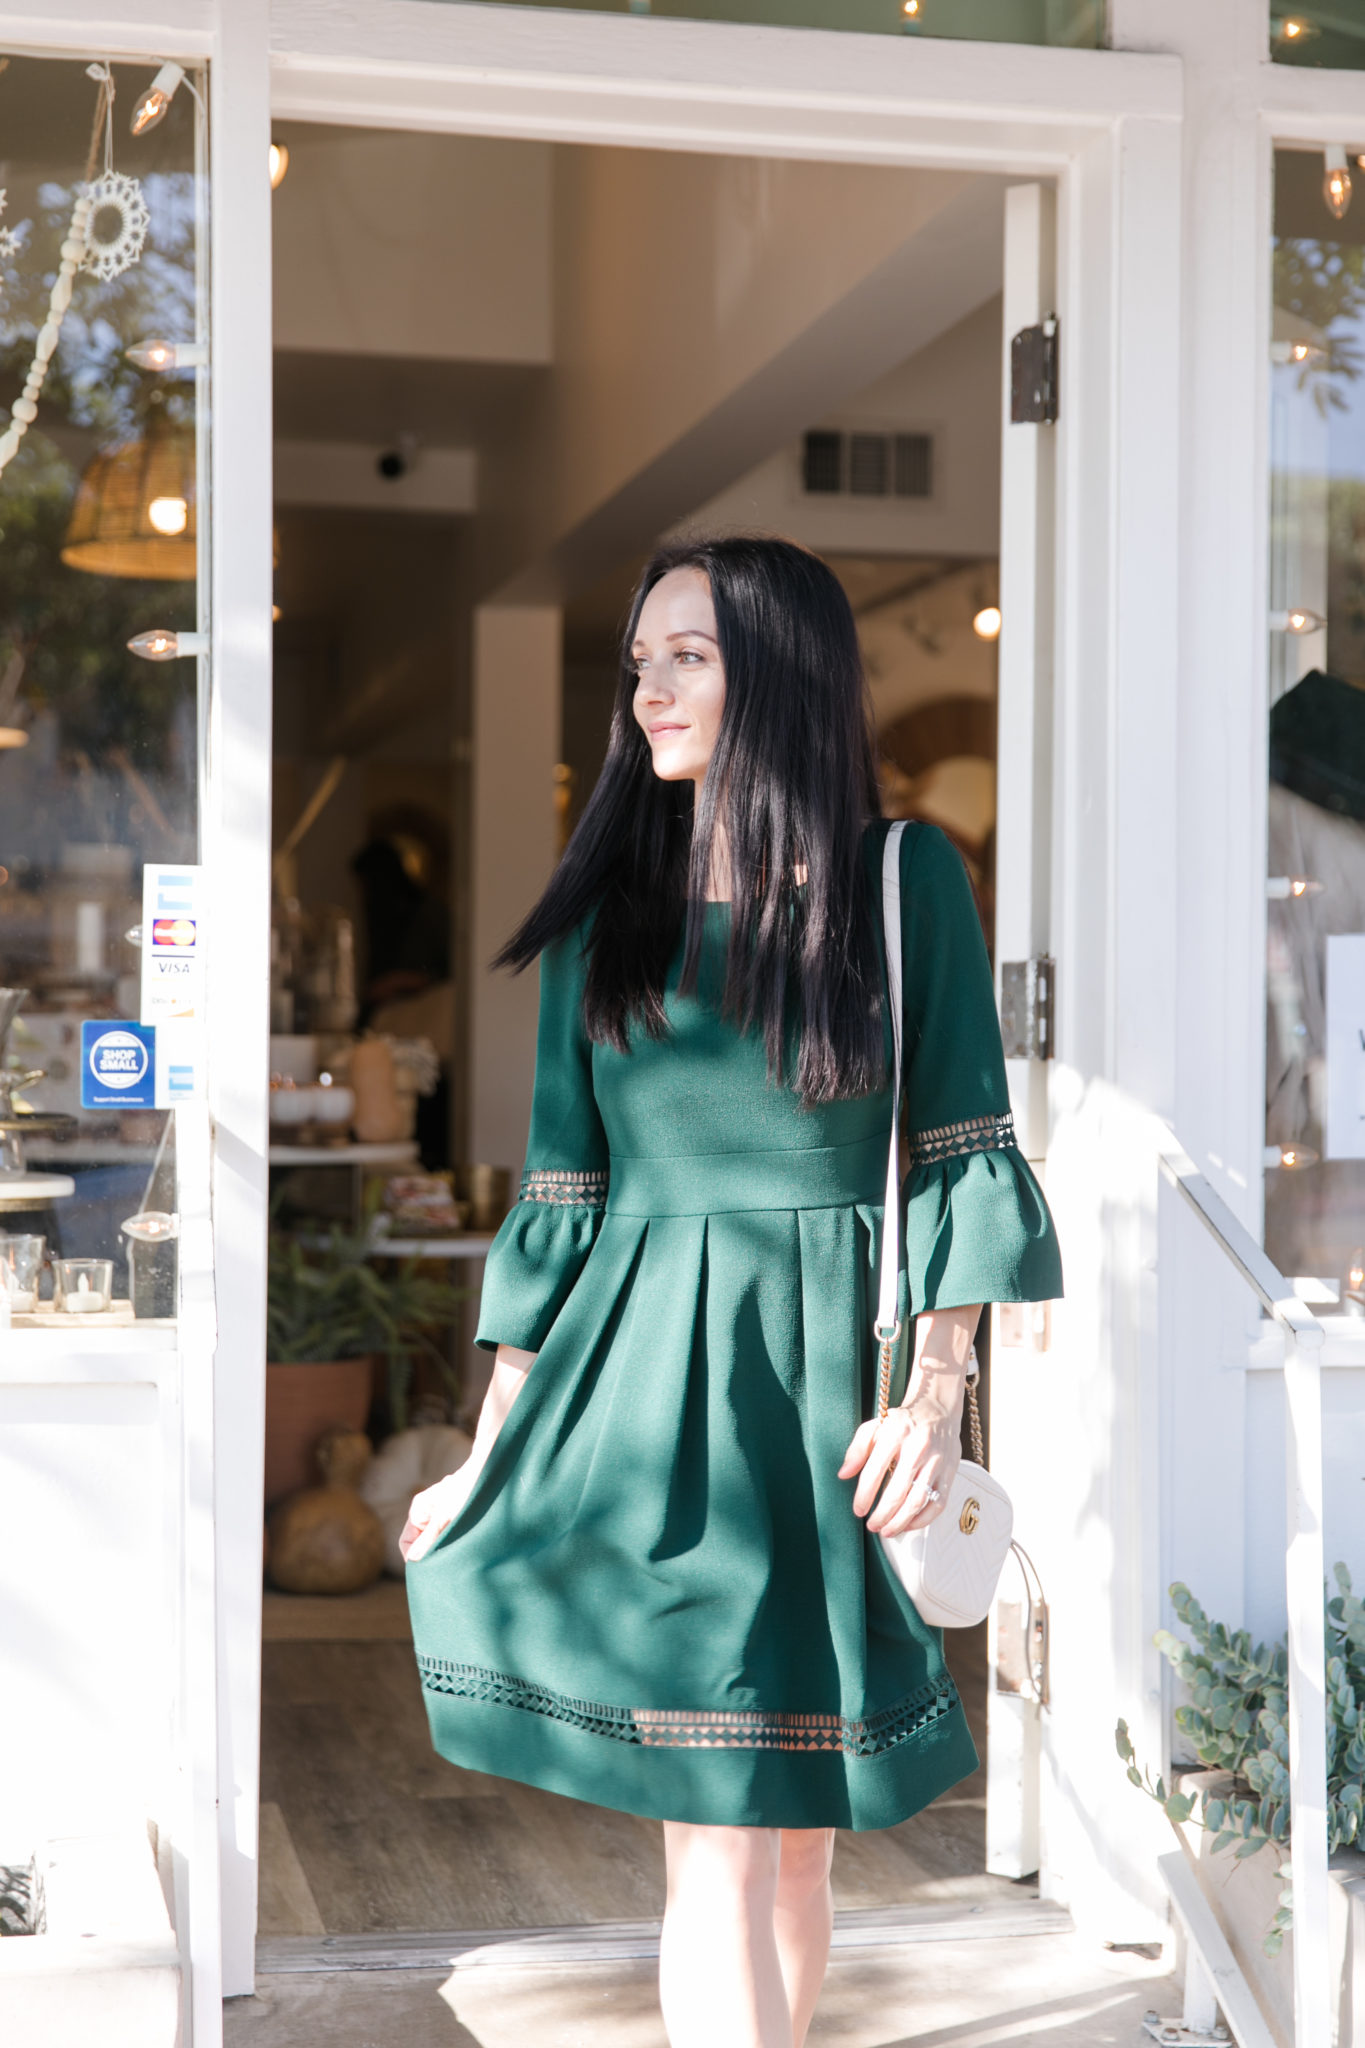 Festive Christmas Outfit Ideas featured by top US fashion blog, Outfits & Outings: image of a woman wearing a Green dress